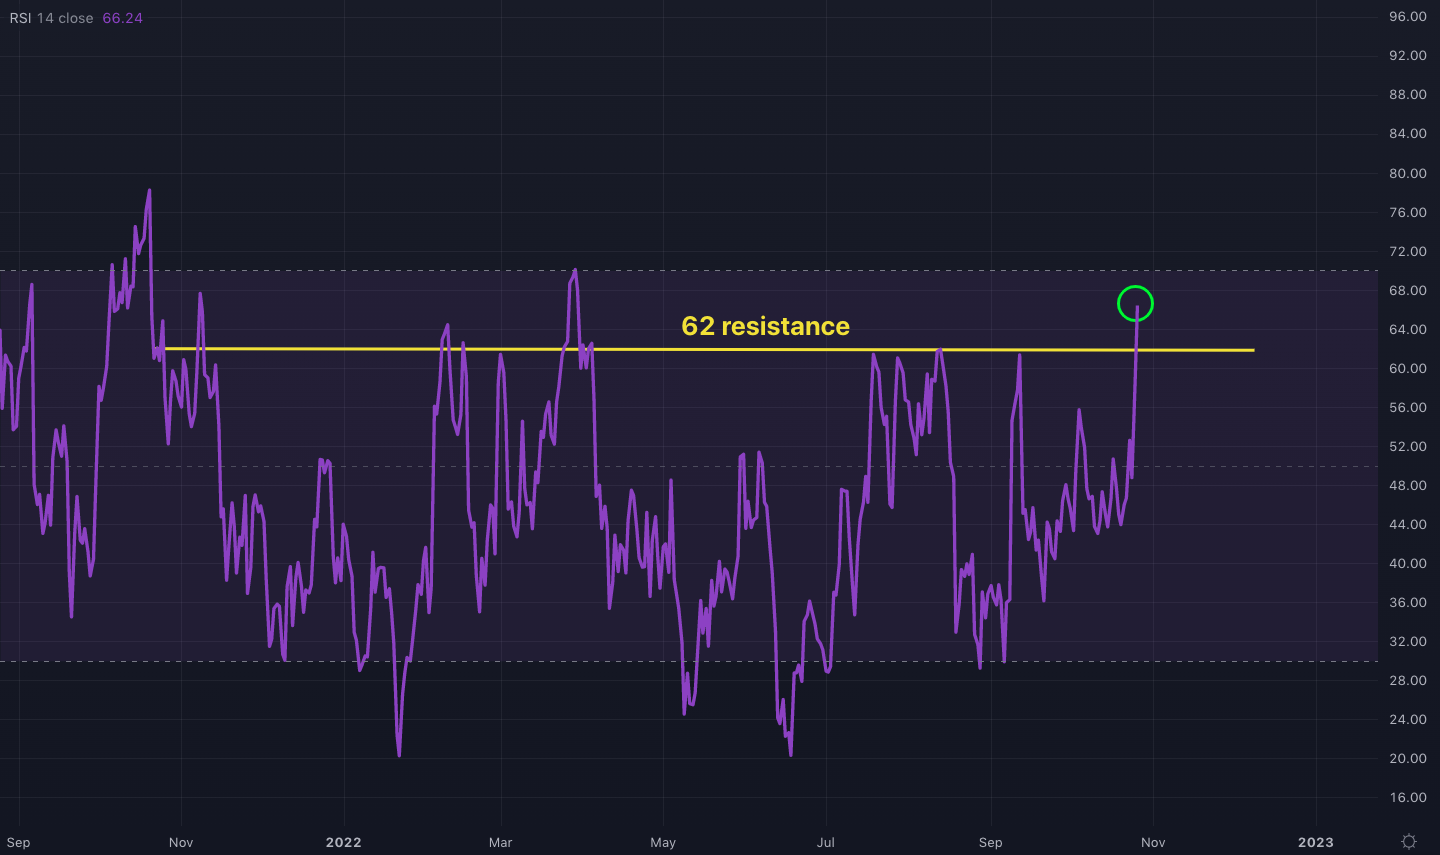 Bitcoin’s daily RSI breaking above the 62 resistance